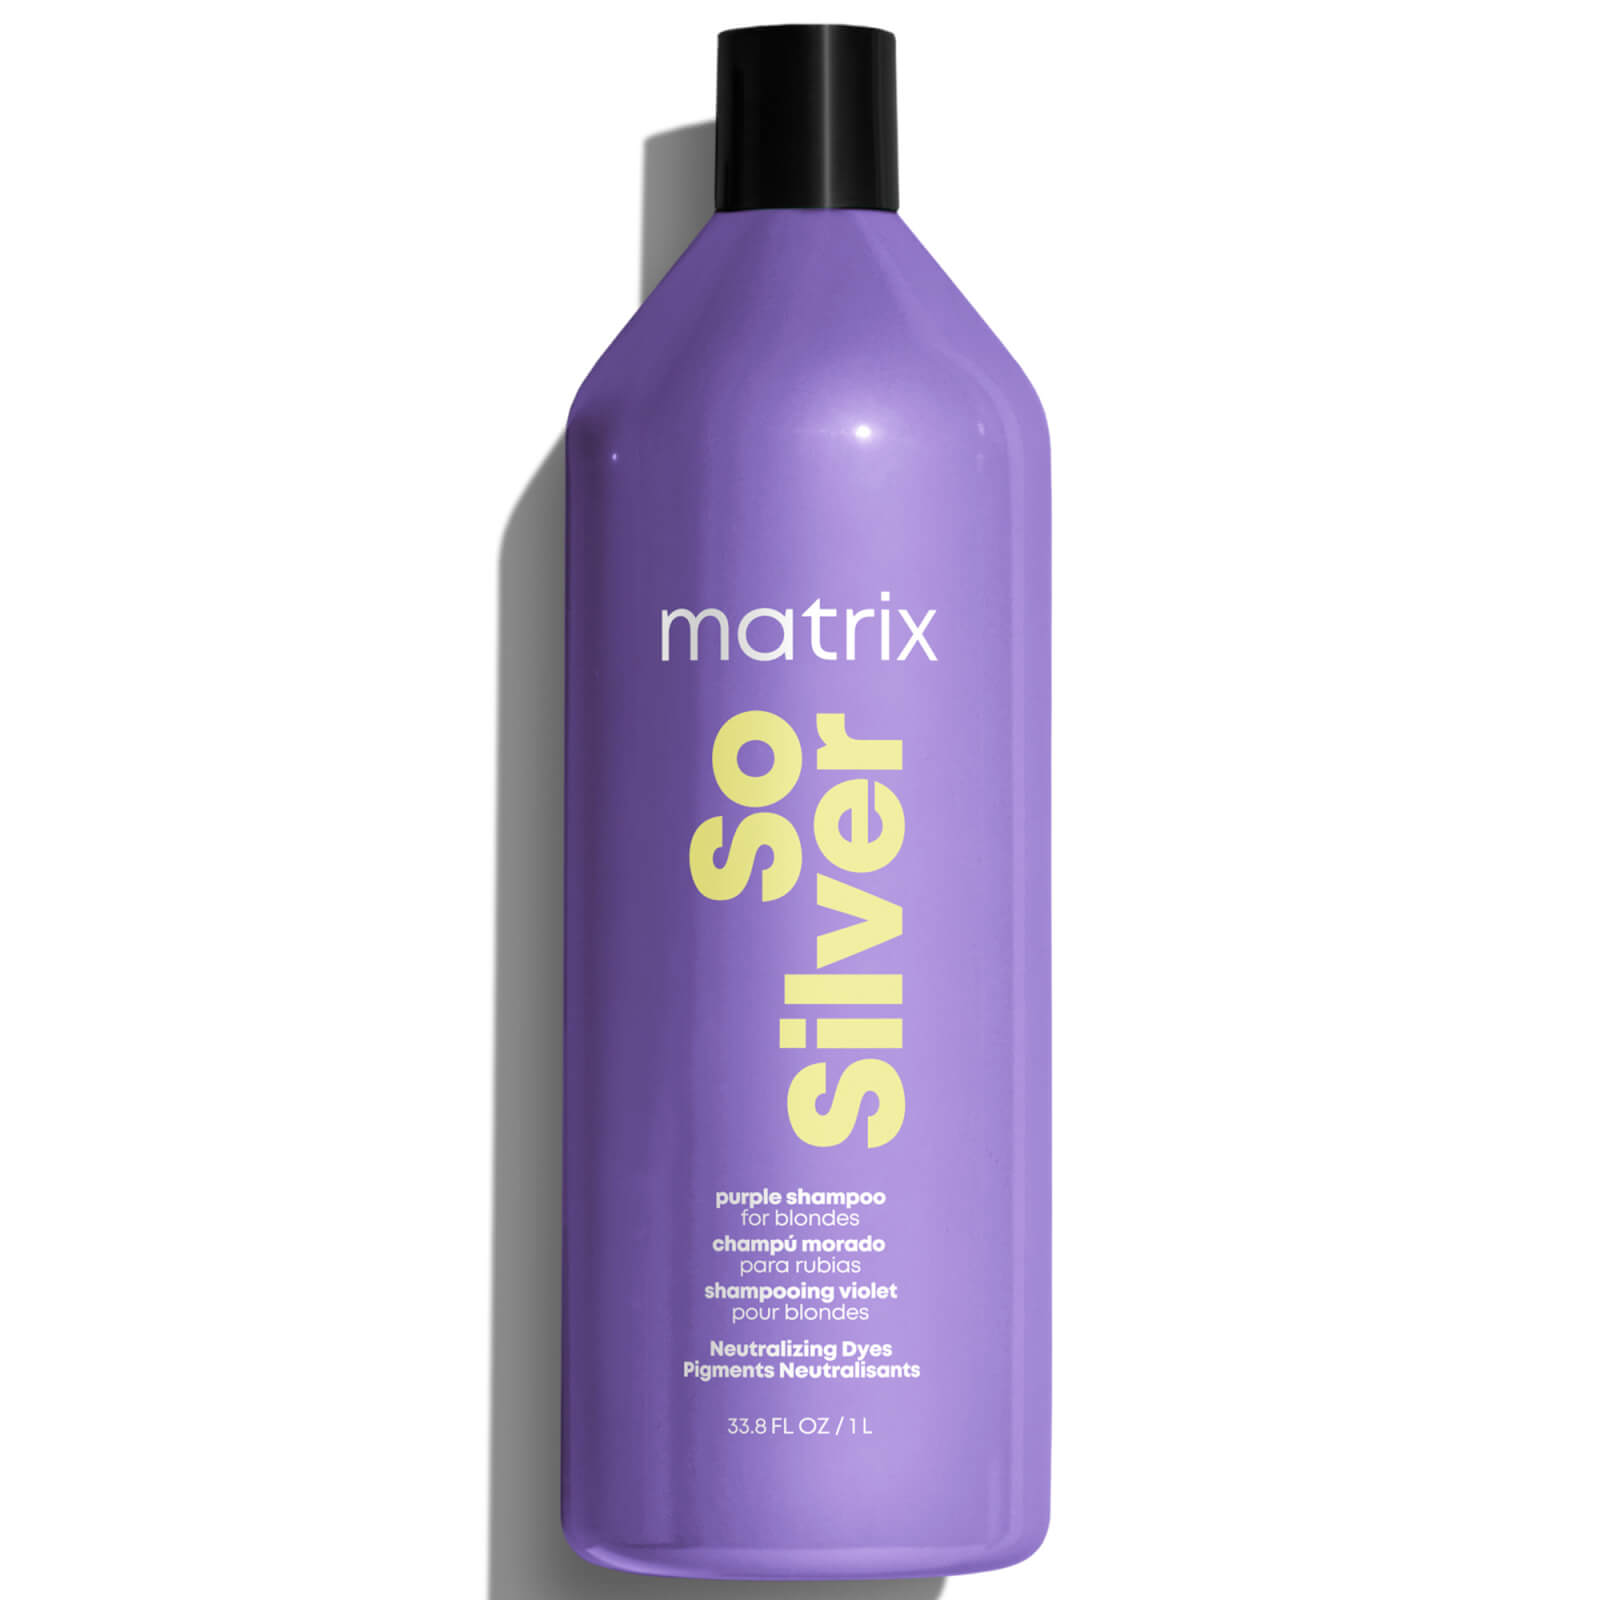 Matrix Total Results So Silver Purple Shampoo for Toning Blondes, Greys and Silvers 1000ml